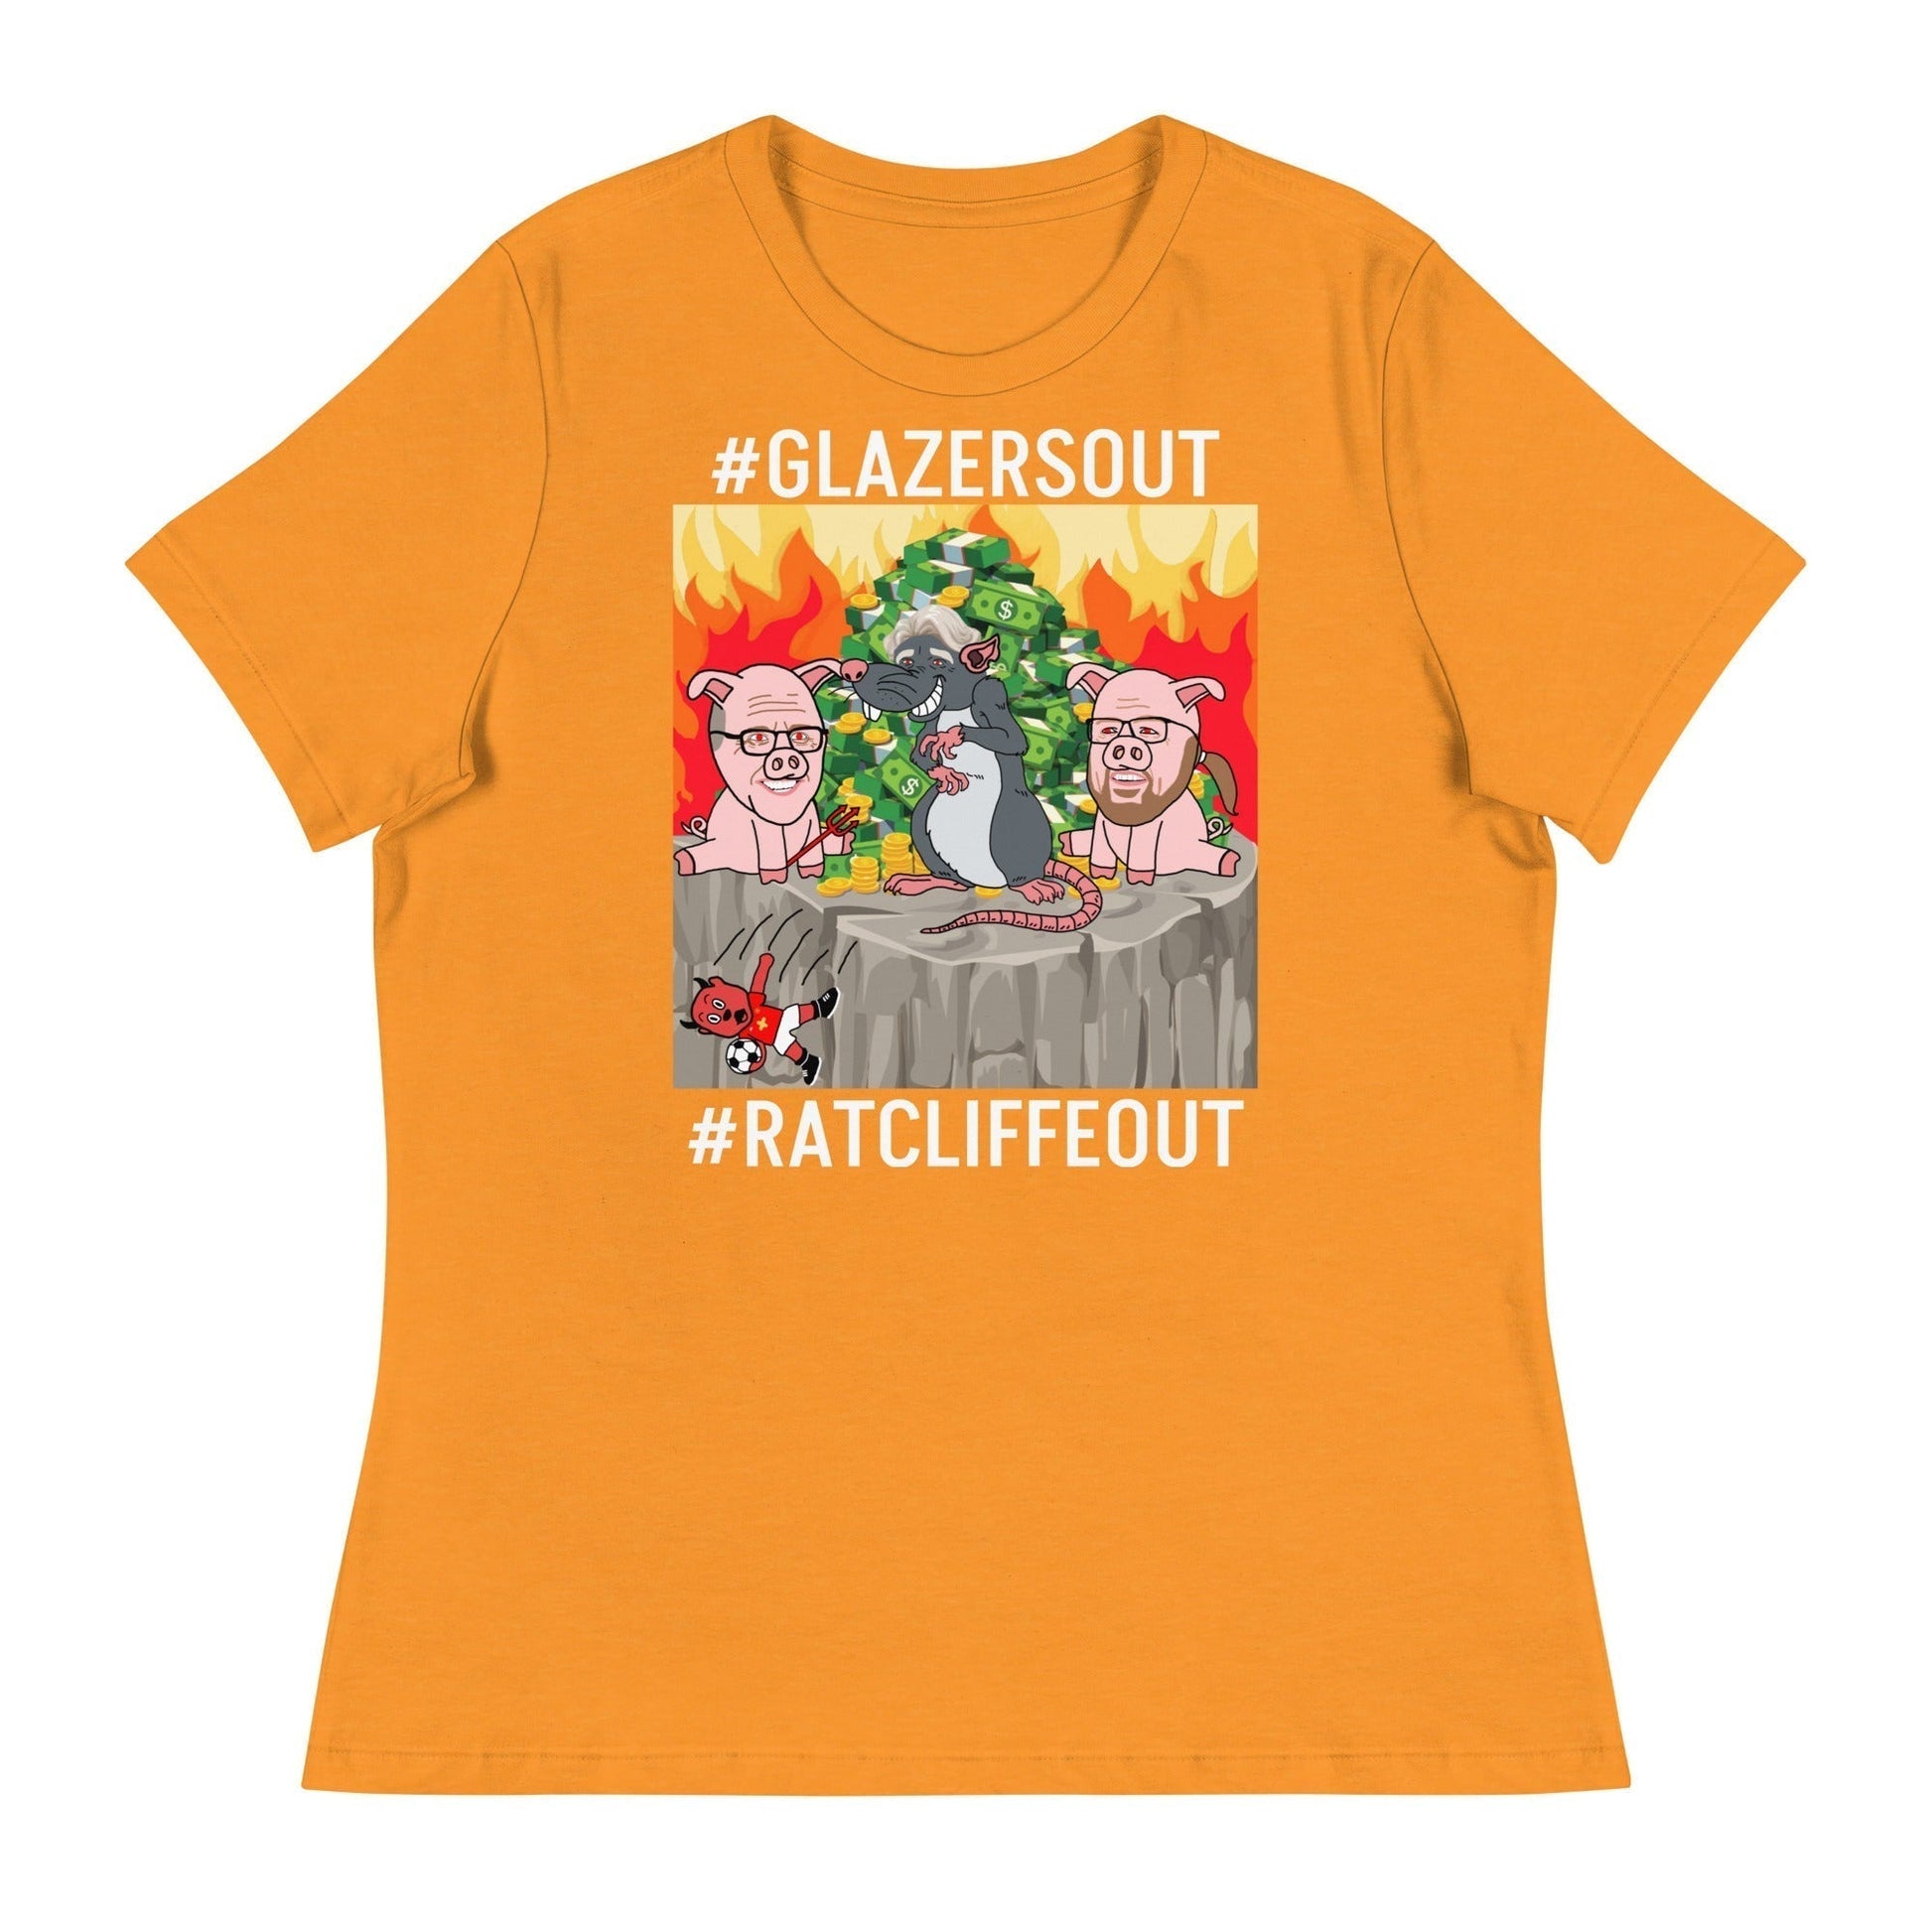 Manchester United Ratcliffe Out, Glazers Out Women's Relaxed Fit T-Shirt, White Letters, #GlazersOut #RatcliffeOut Next Cult Brand Football, GlazersOut, Manchester United, RatcliffeOut